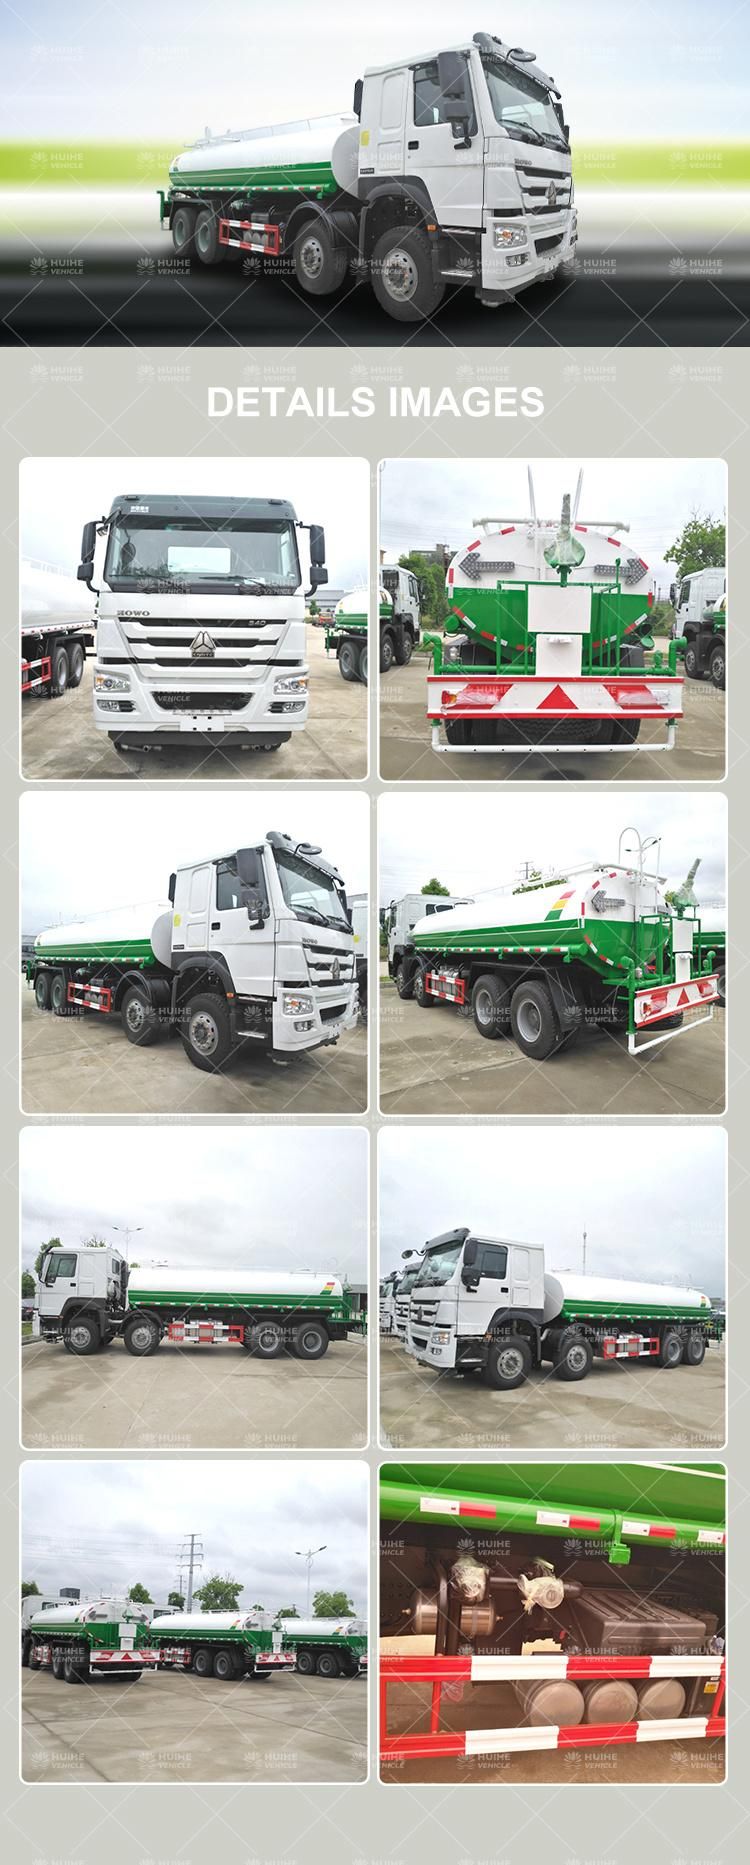 Used Water Tanker Truck HOWO 20000 Liter Used Heavy Duty Water Trucks From China Fro Sales